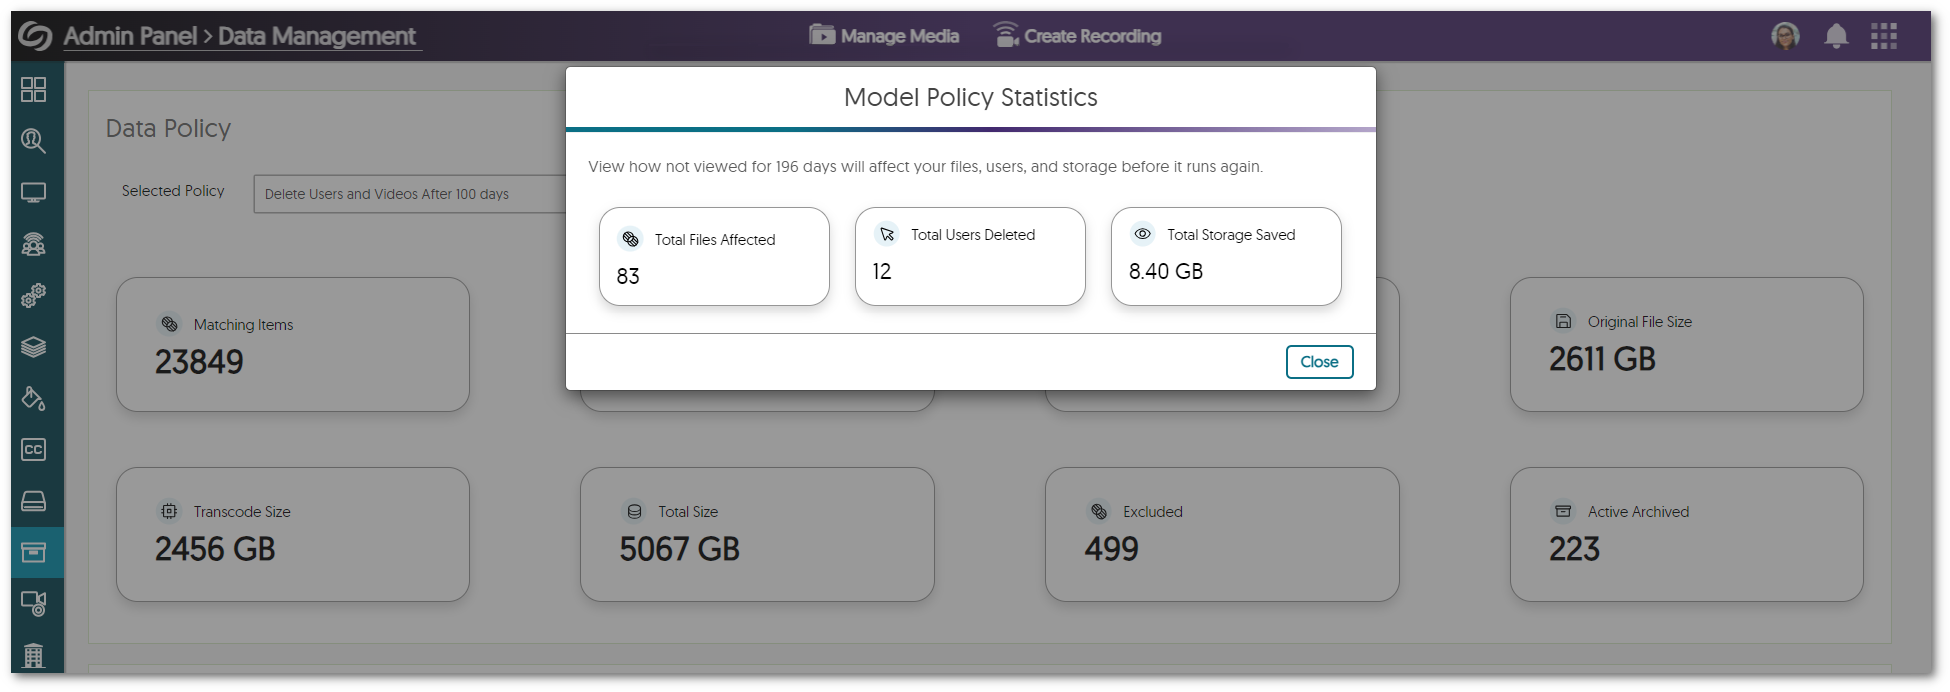 Modal Forecast of a data policy showing the number of files, users, and storage affected.